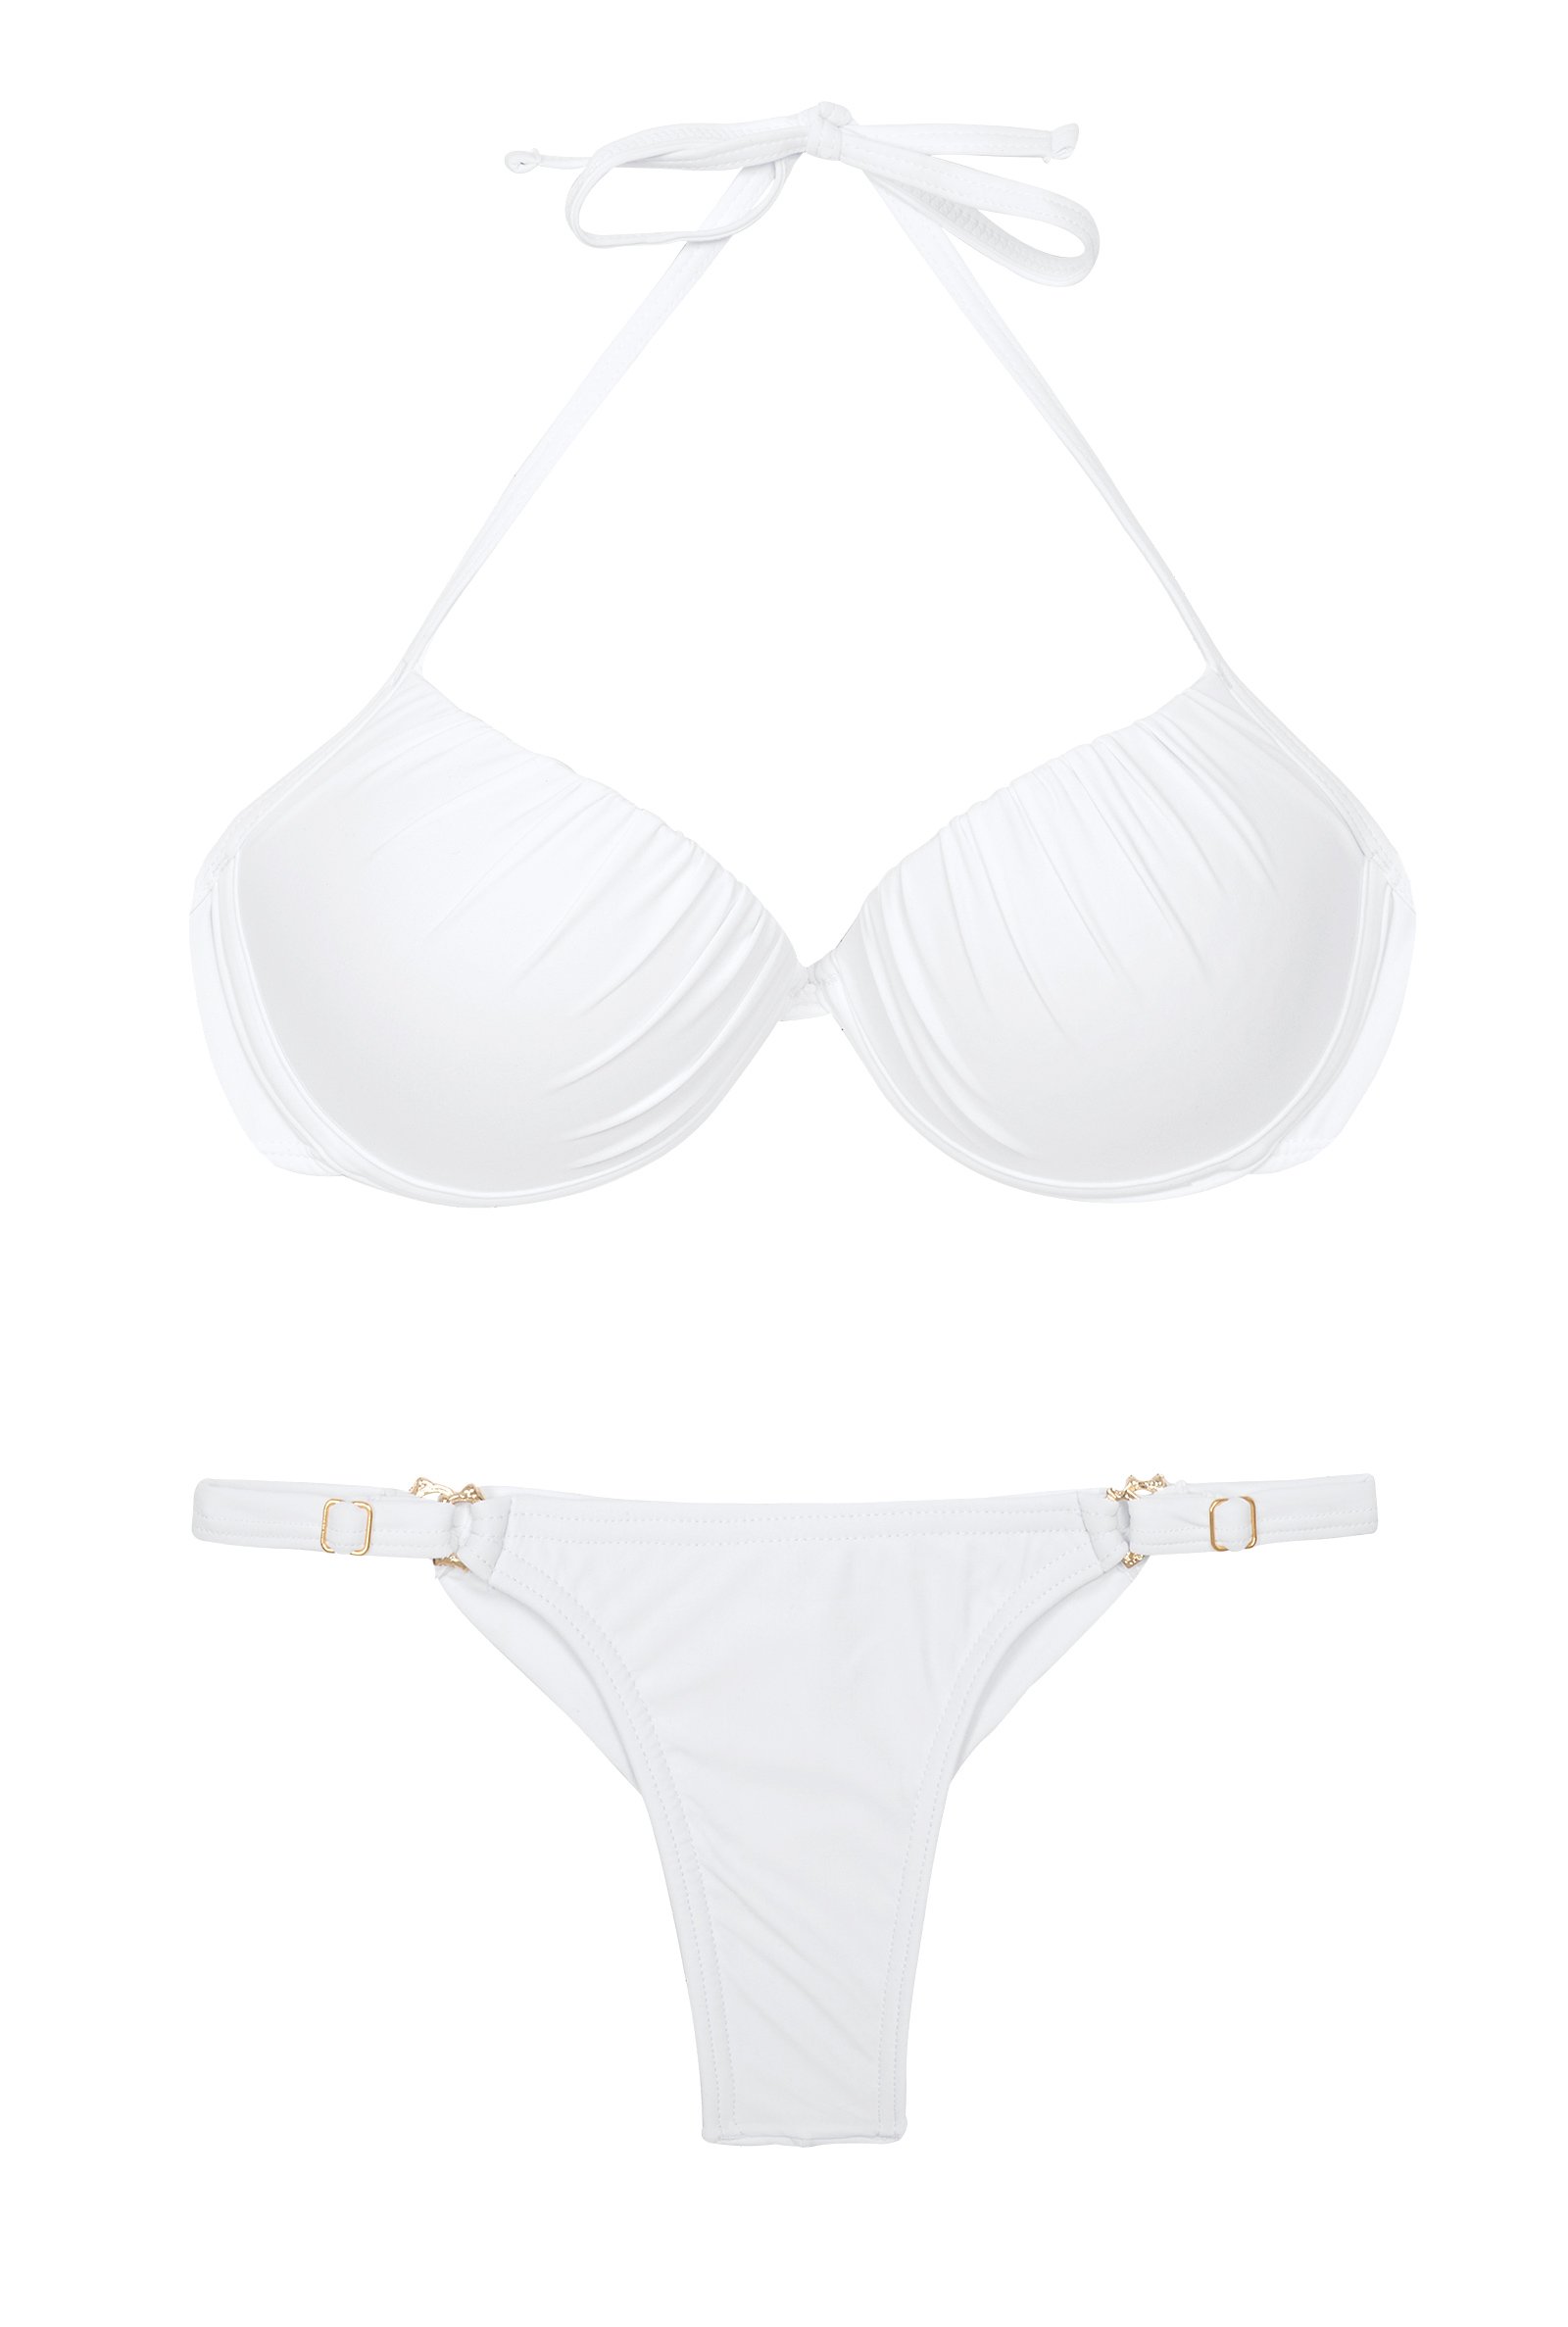 White Bathing Suit With Adjustable G-string Bottom And Push-up Bra Top ...